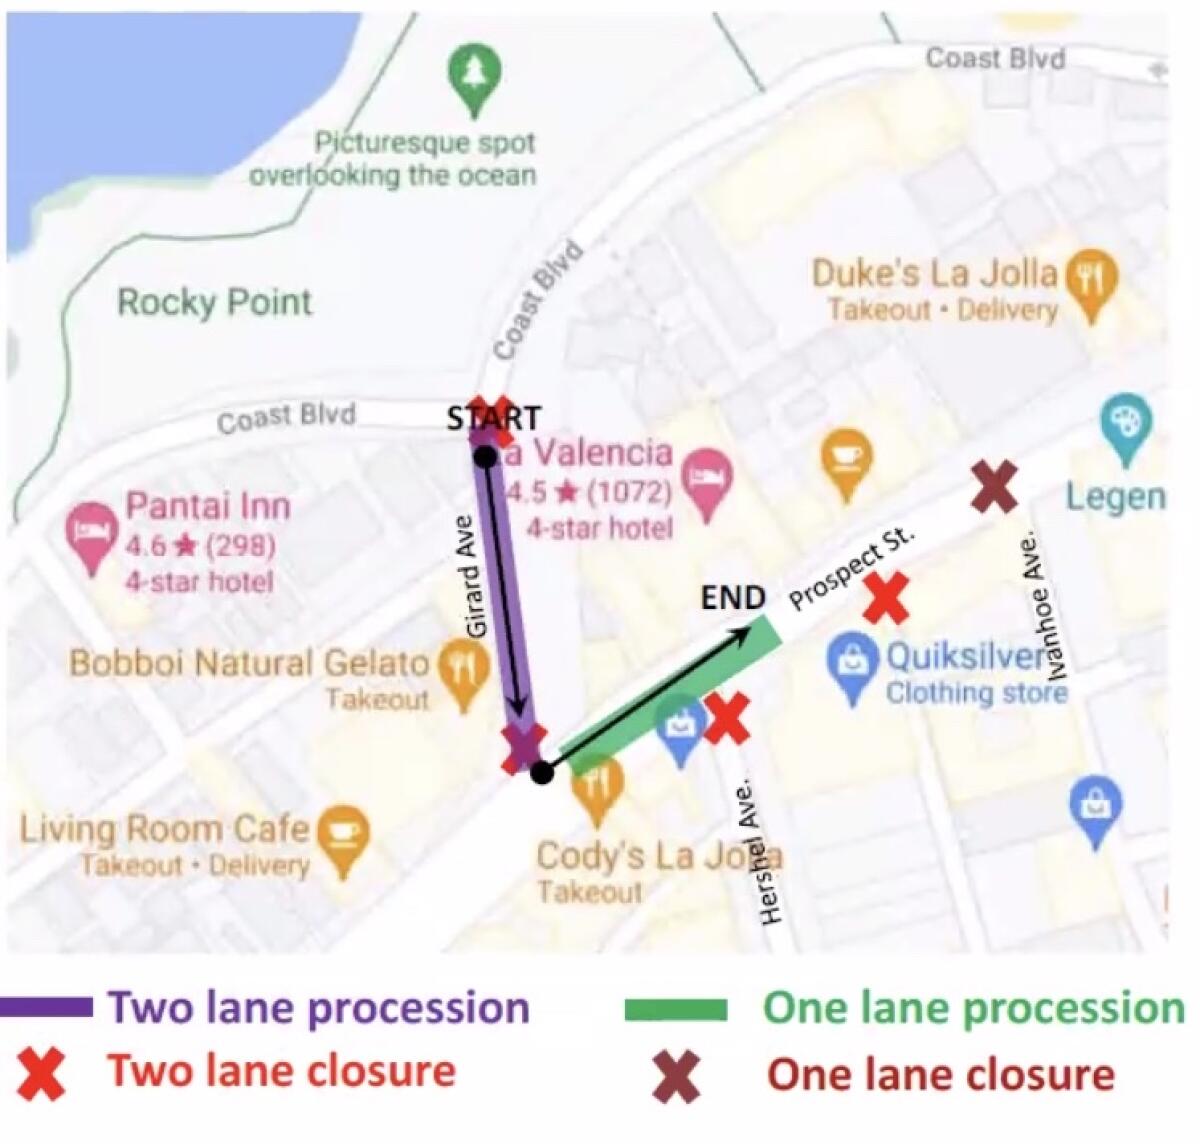 A map shows the route proposed for a baraat, or Indian wedding procession, in May.